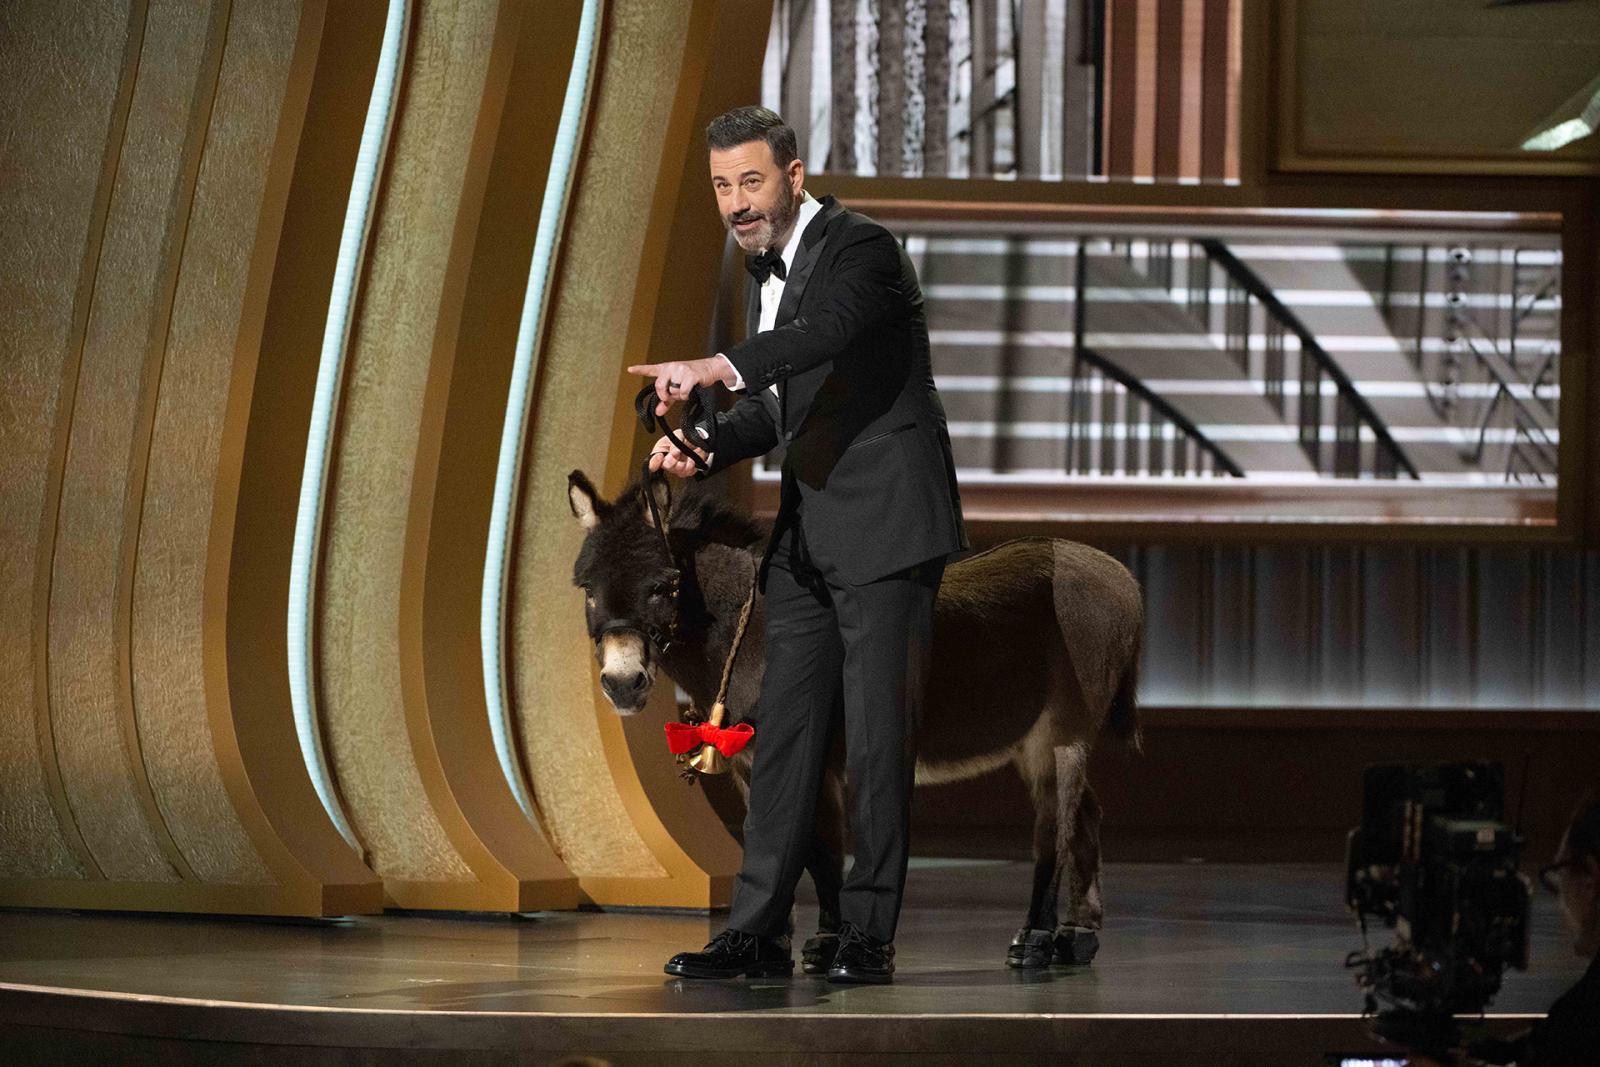 The Oscars' Jimmy Kimmel Gets Roasted by Fans: 